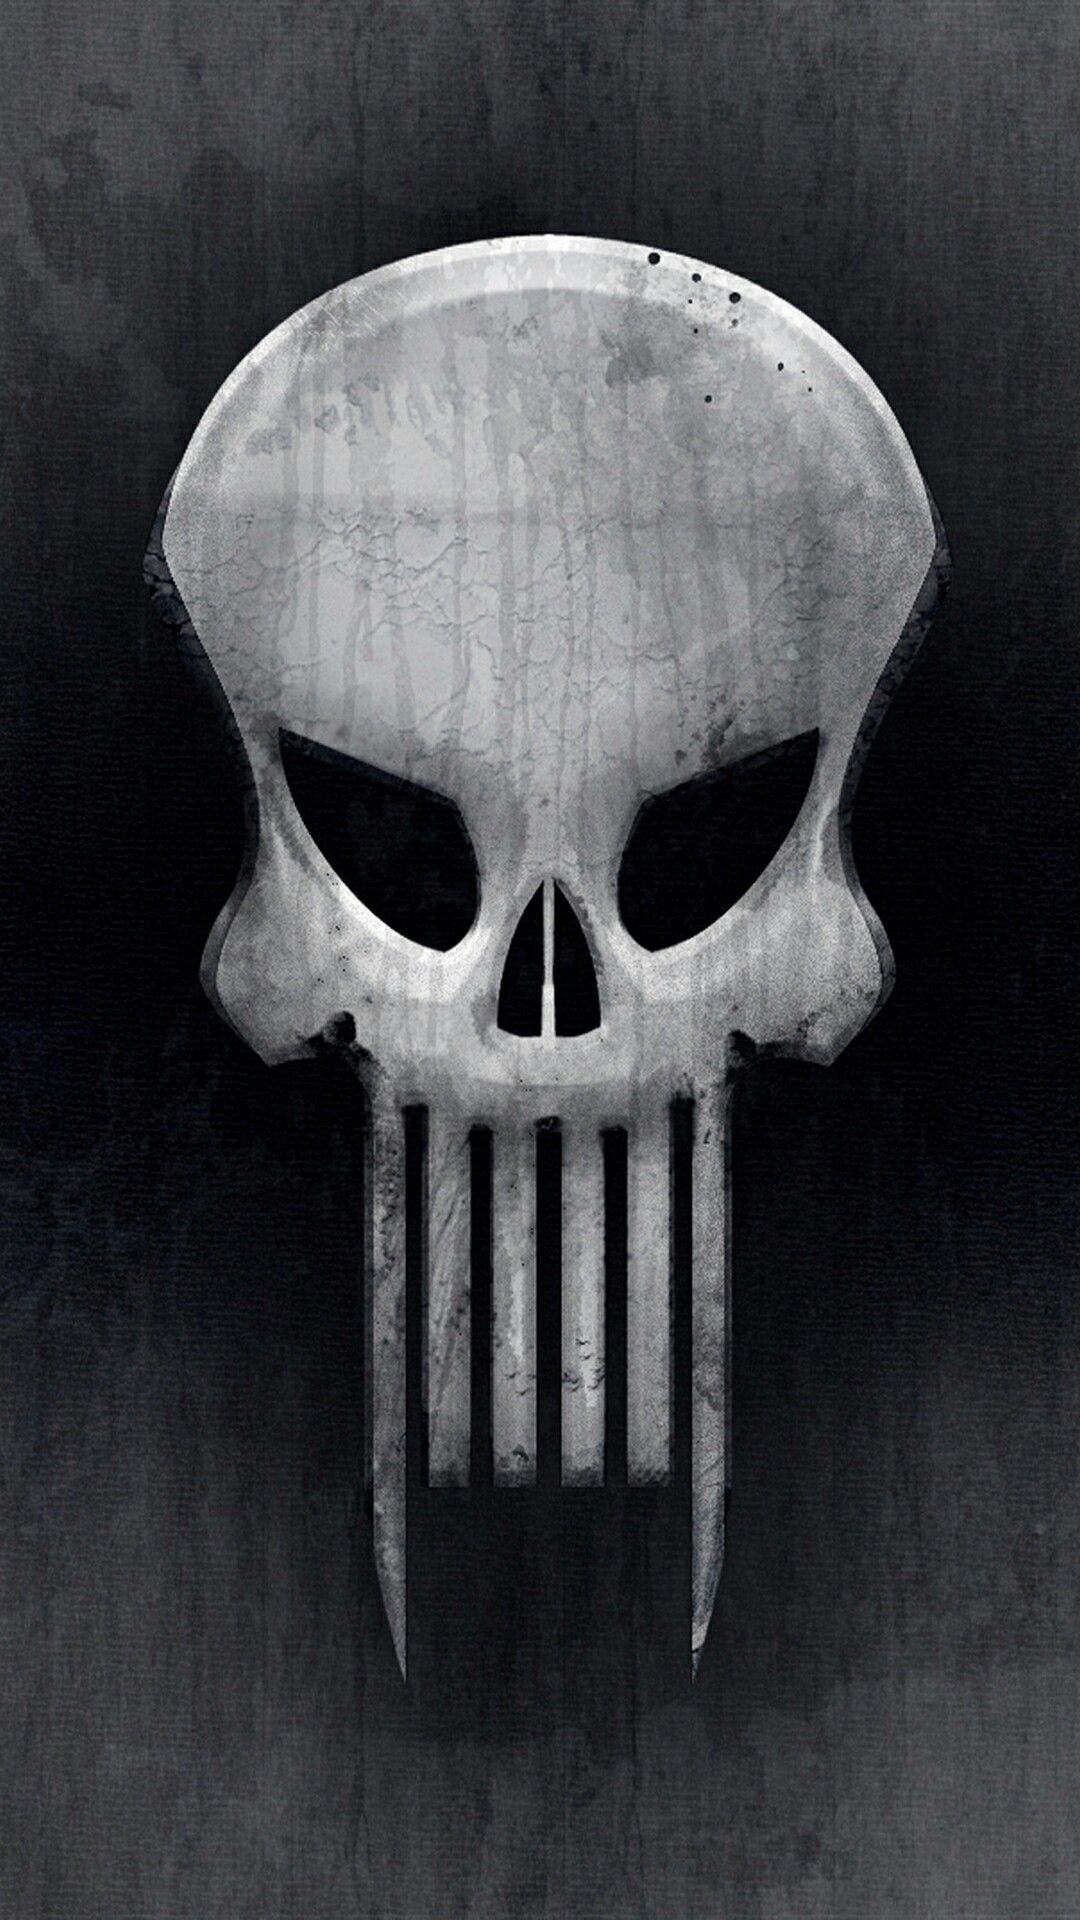 1920x1080 Punisher Logo Wallpapers Android Red Punisher Skull Wallpaper Hd Art 1920x1080 1080x1920